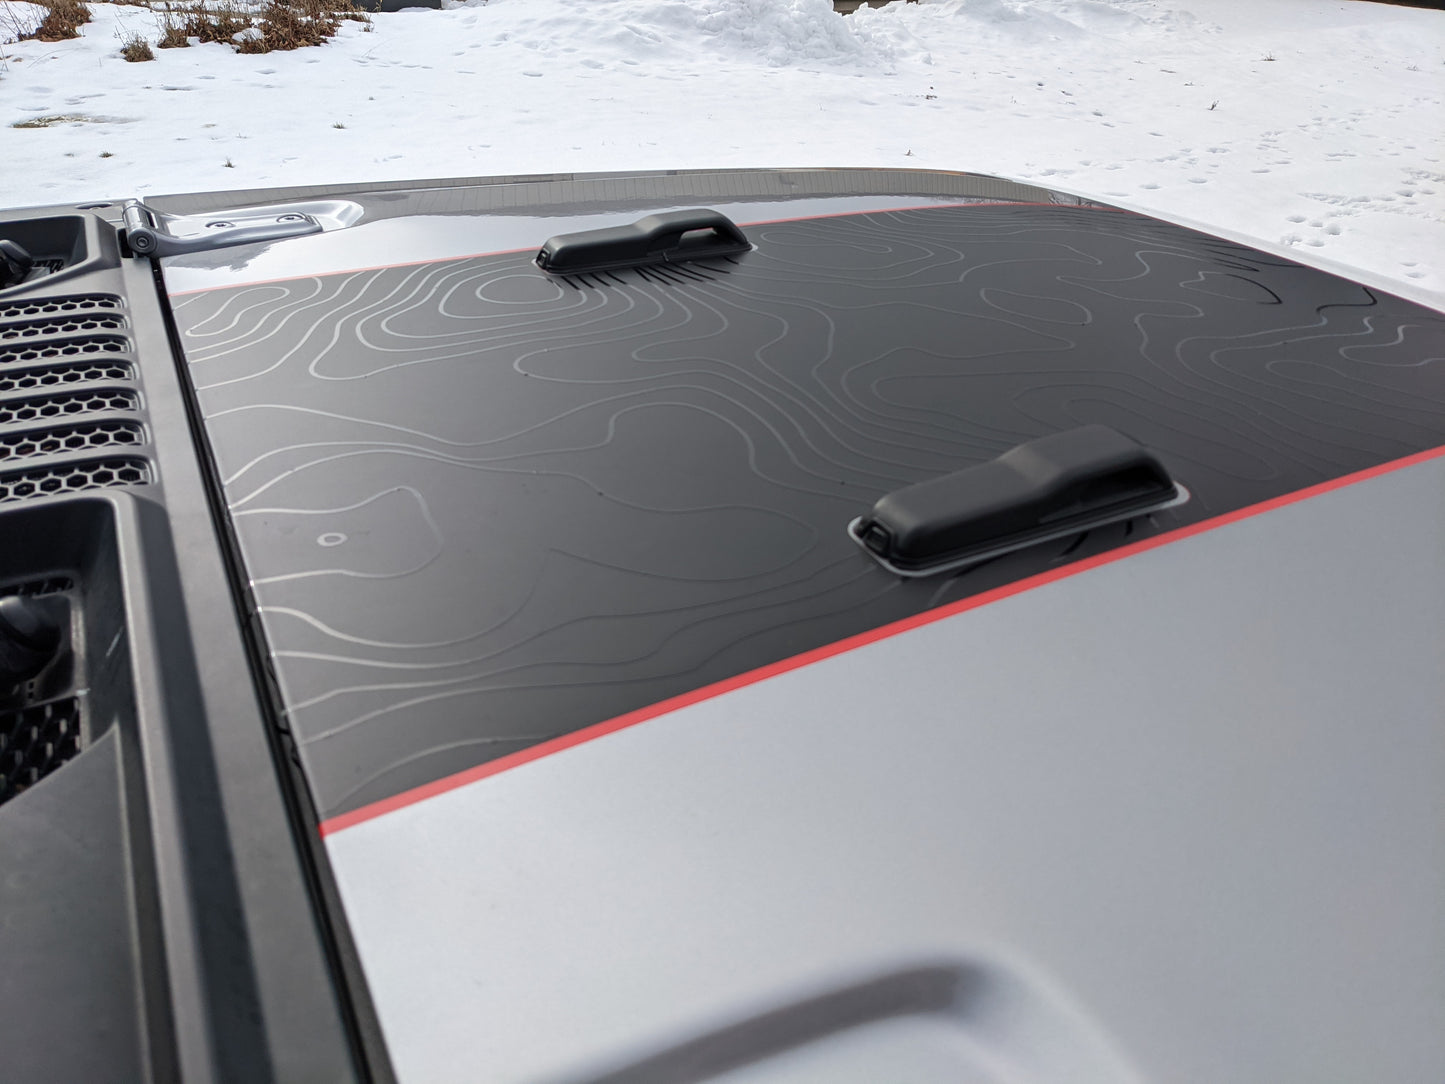 Topographical Red Line Rubicon Blackout Hood Decal- Fits Jeep Wrangler & Gladiator JL Hood Decal (3 Pieces)